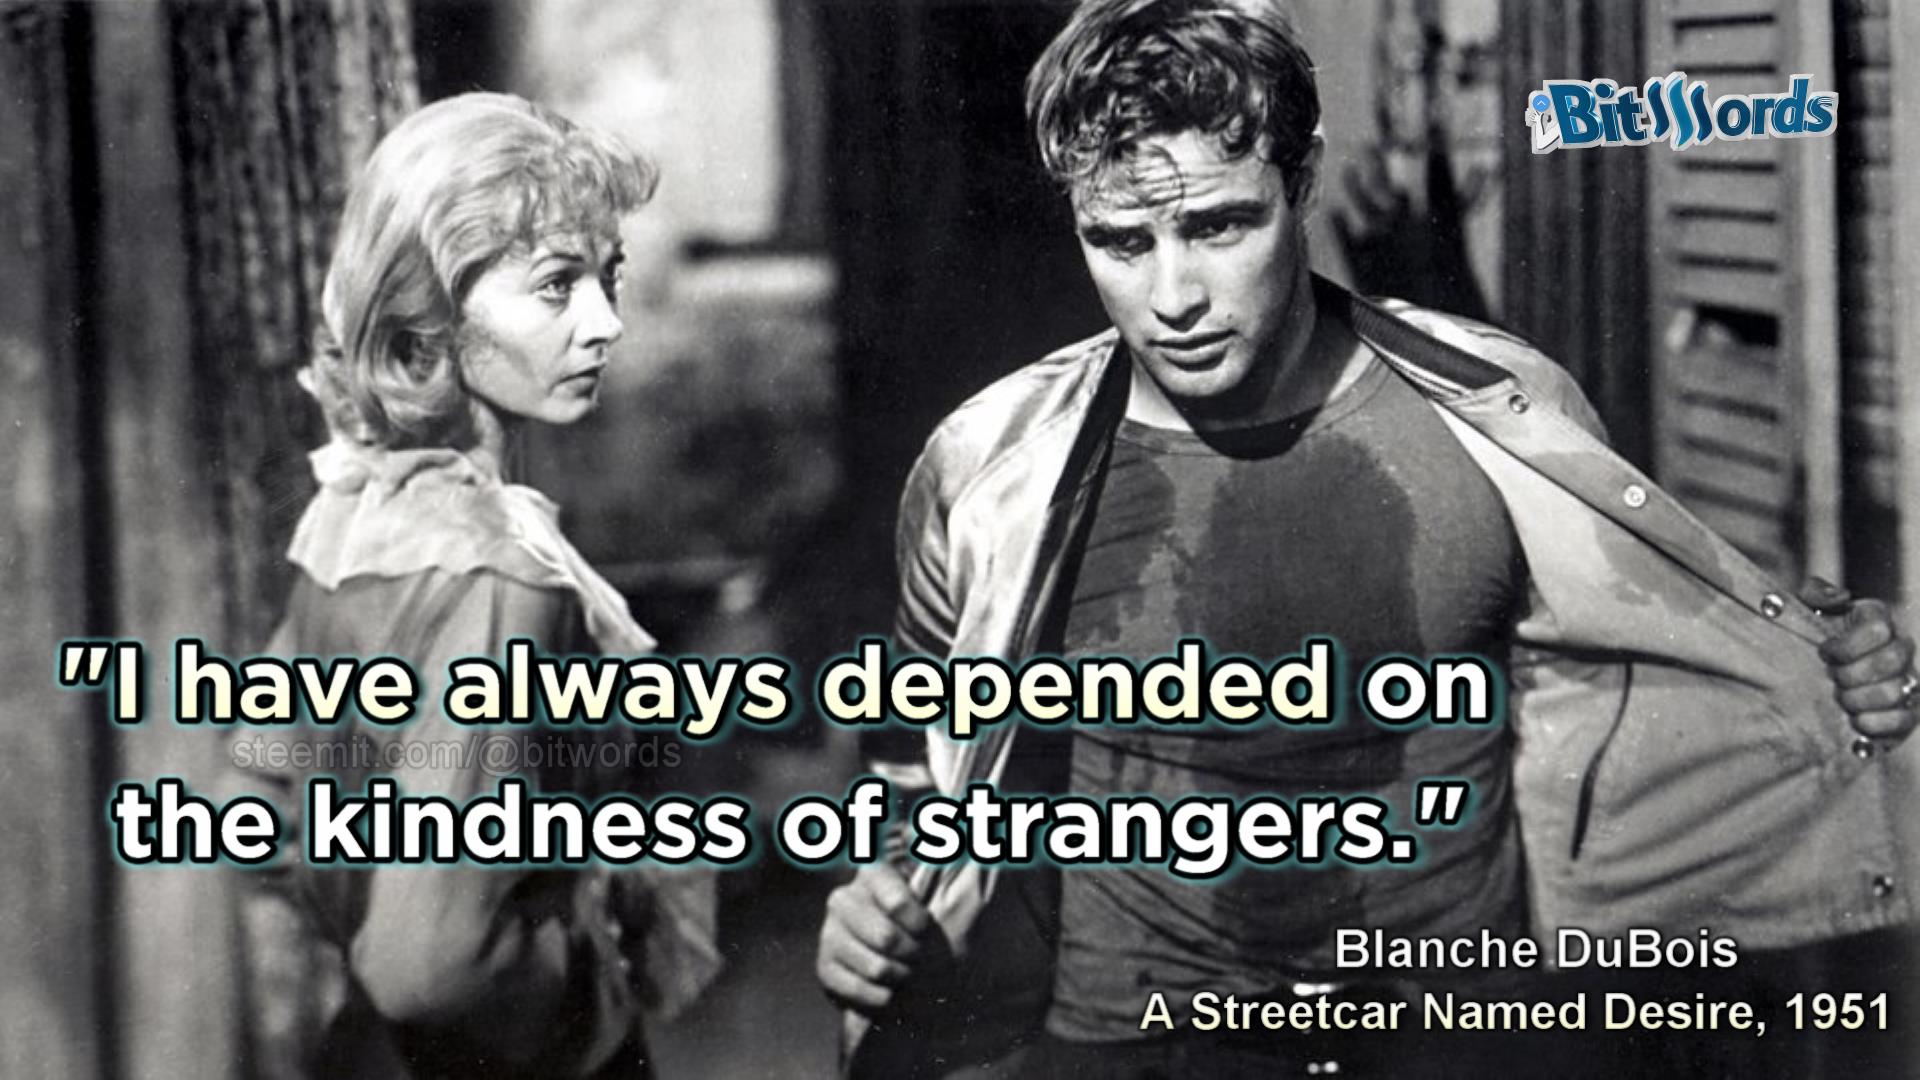 Movie Quote Of The Day A Streetcar Named Desire 1951 Depending On The Kindness Of Strangers Steemit